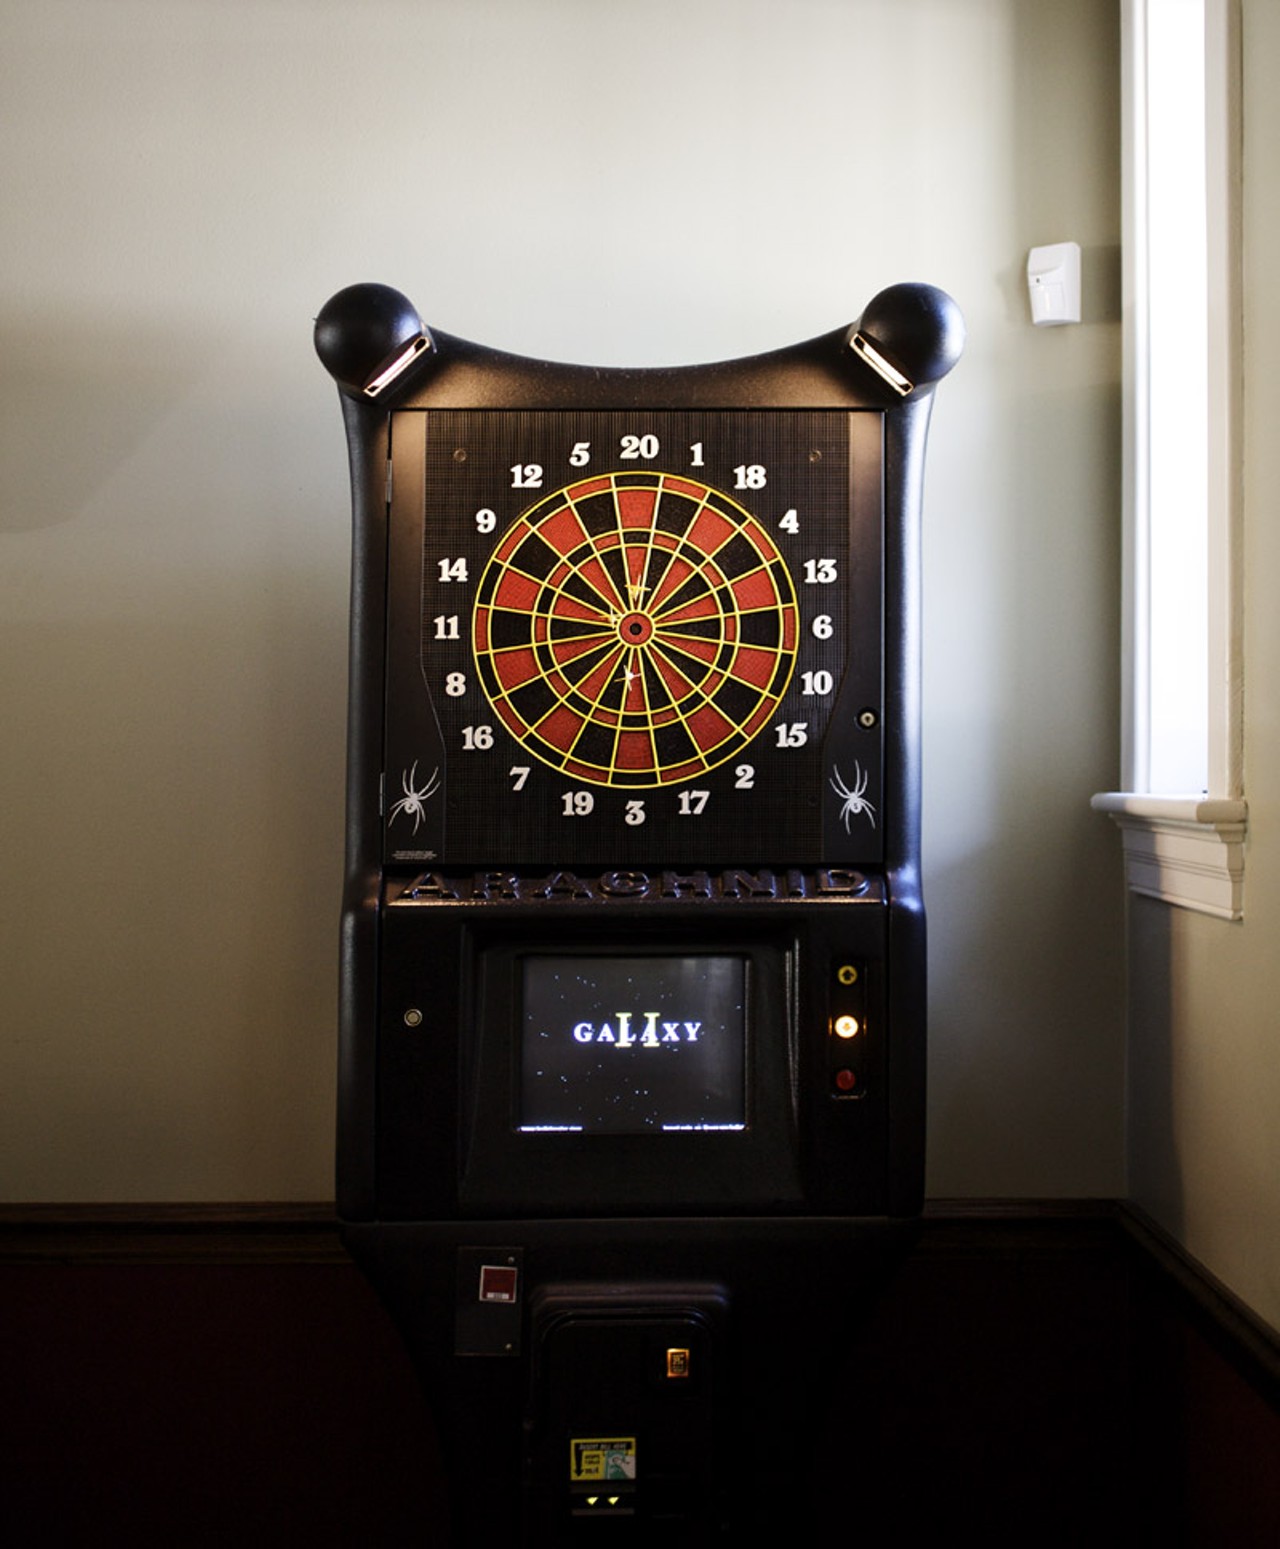 In the bar area of the restaurant there is a jukebox and dart board (shown).